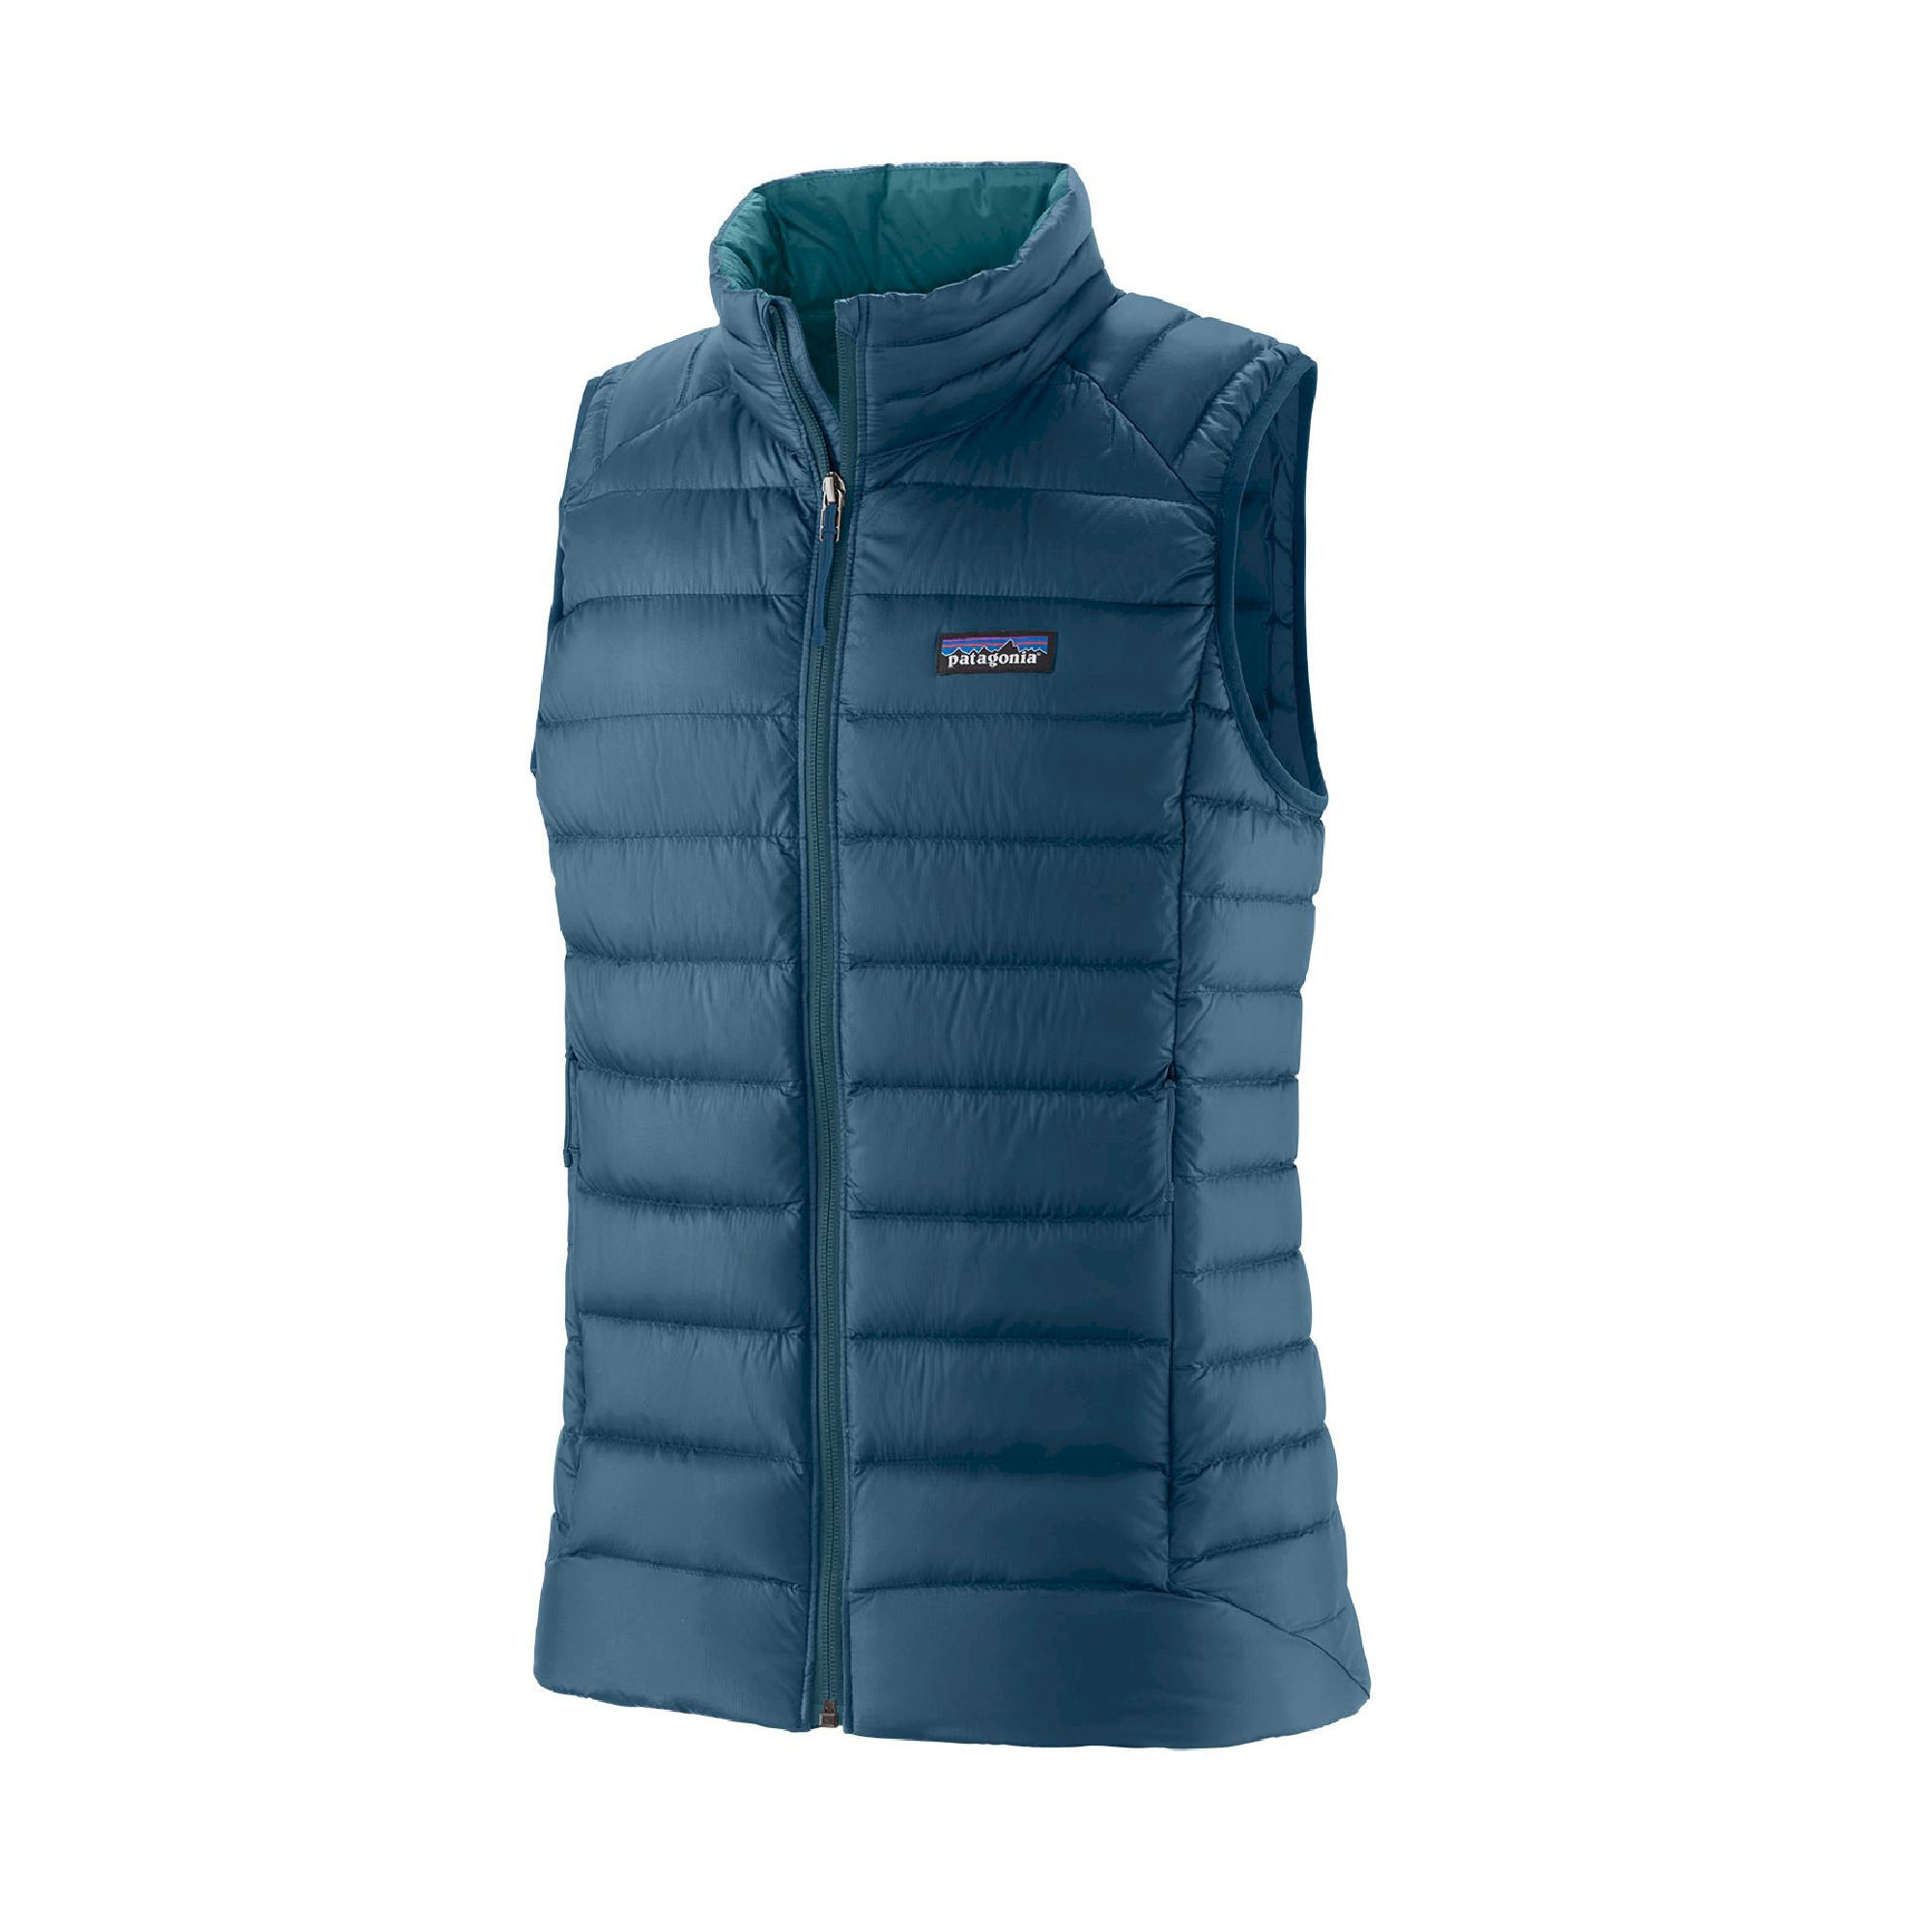 Patagonia Down Sweater Vest - Chaleco de plumas - Mujer